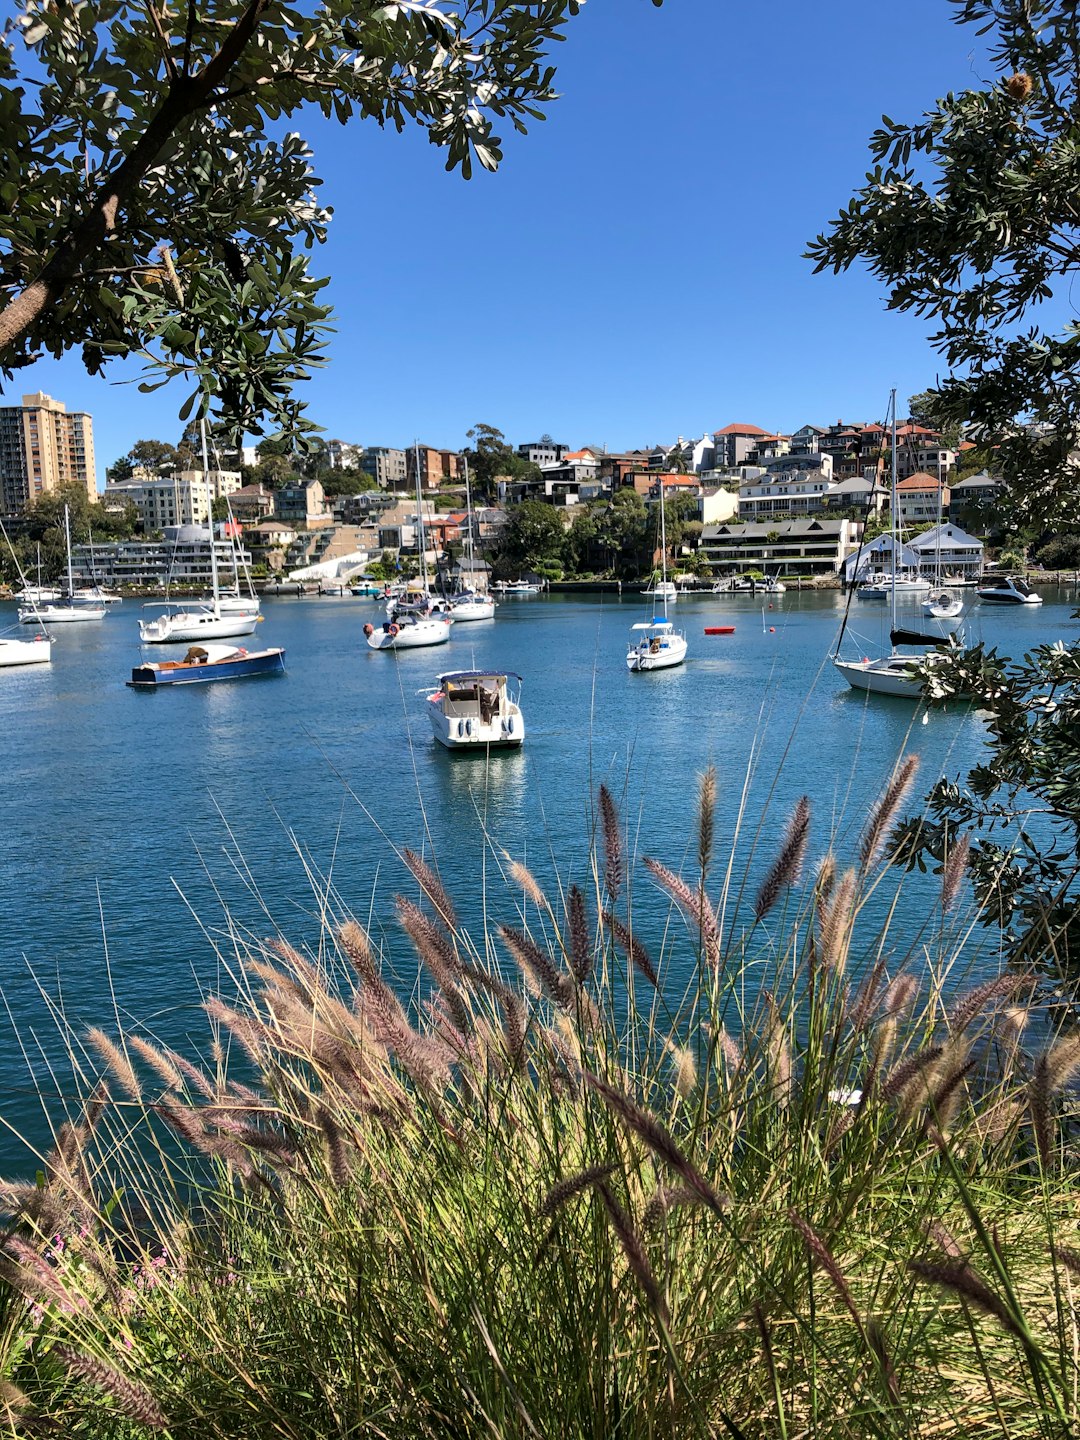 Bay photo spot 1 Harbourview Crescent Pittwater